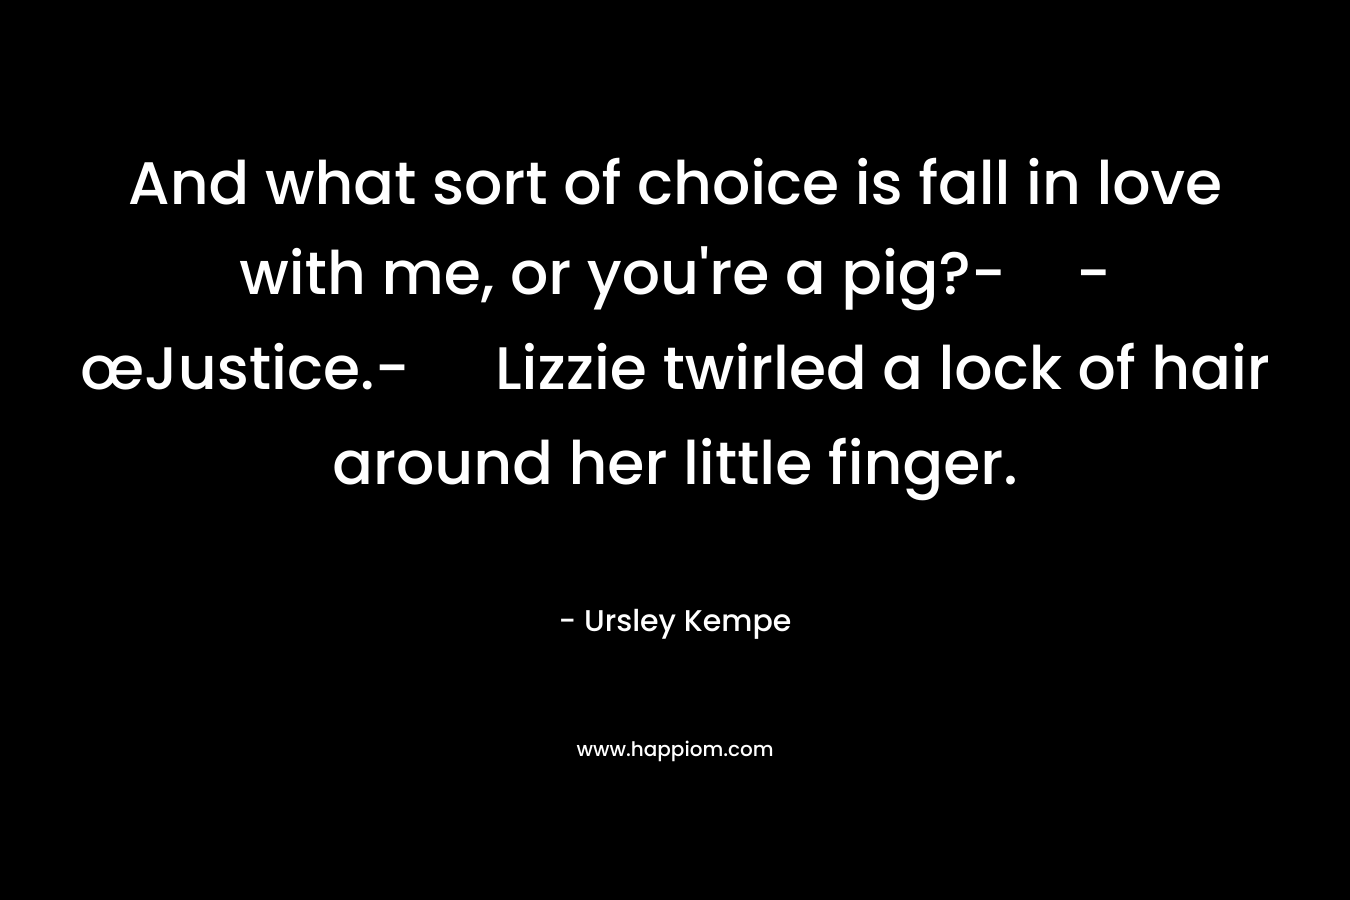 And what sort of choice is fall in love with me, or you’re a pig?--œJustice.- Lizzie twirled a lock of hair around her little finger. – Ursley Kempe